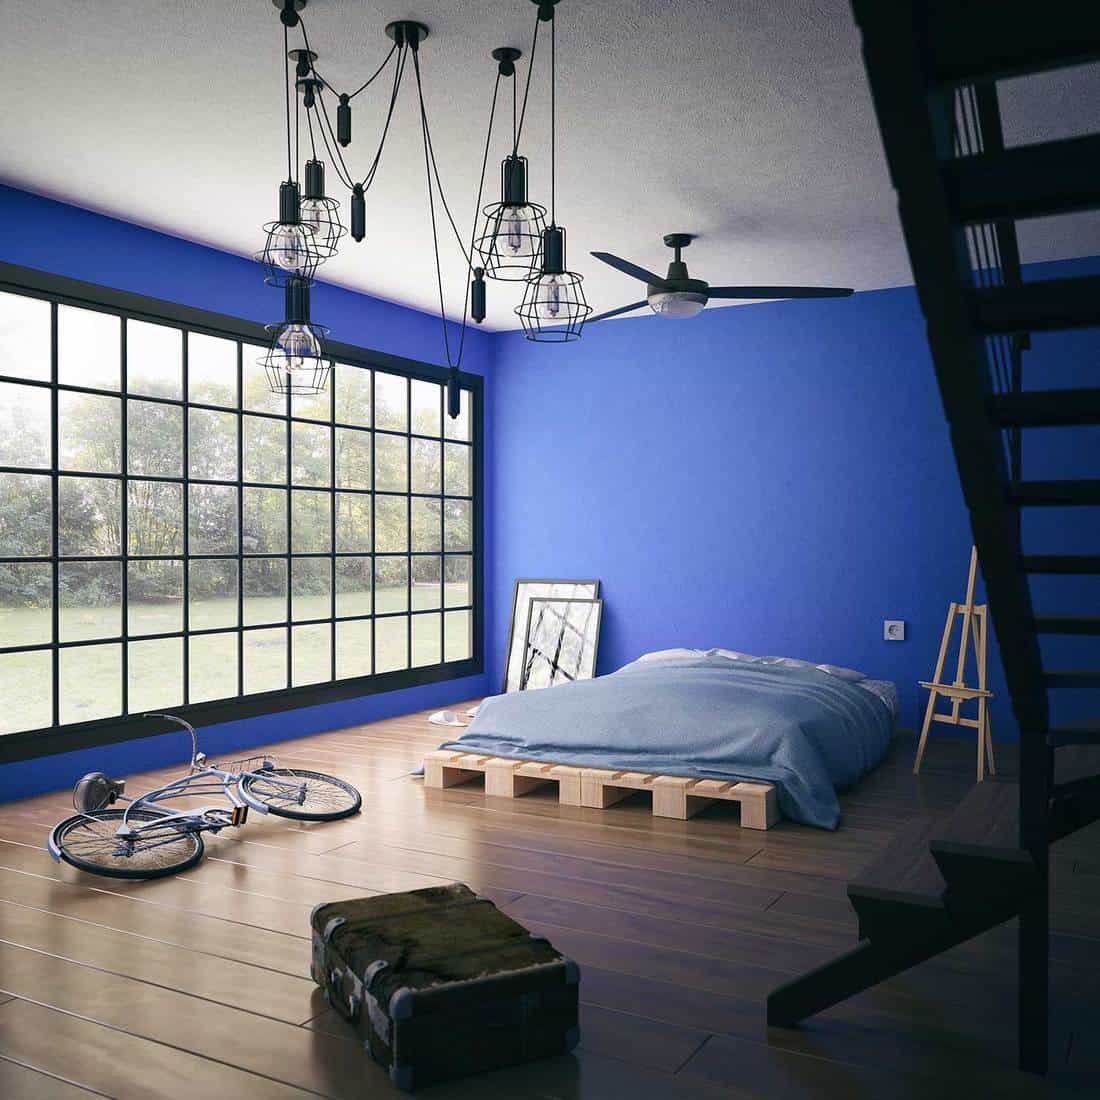 Tidy loft apartment with cool blue walls